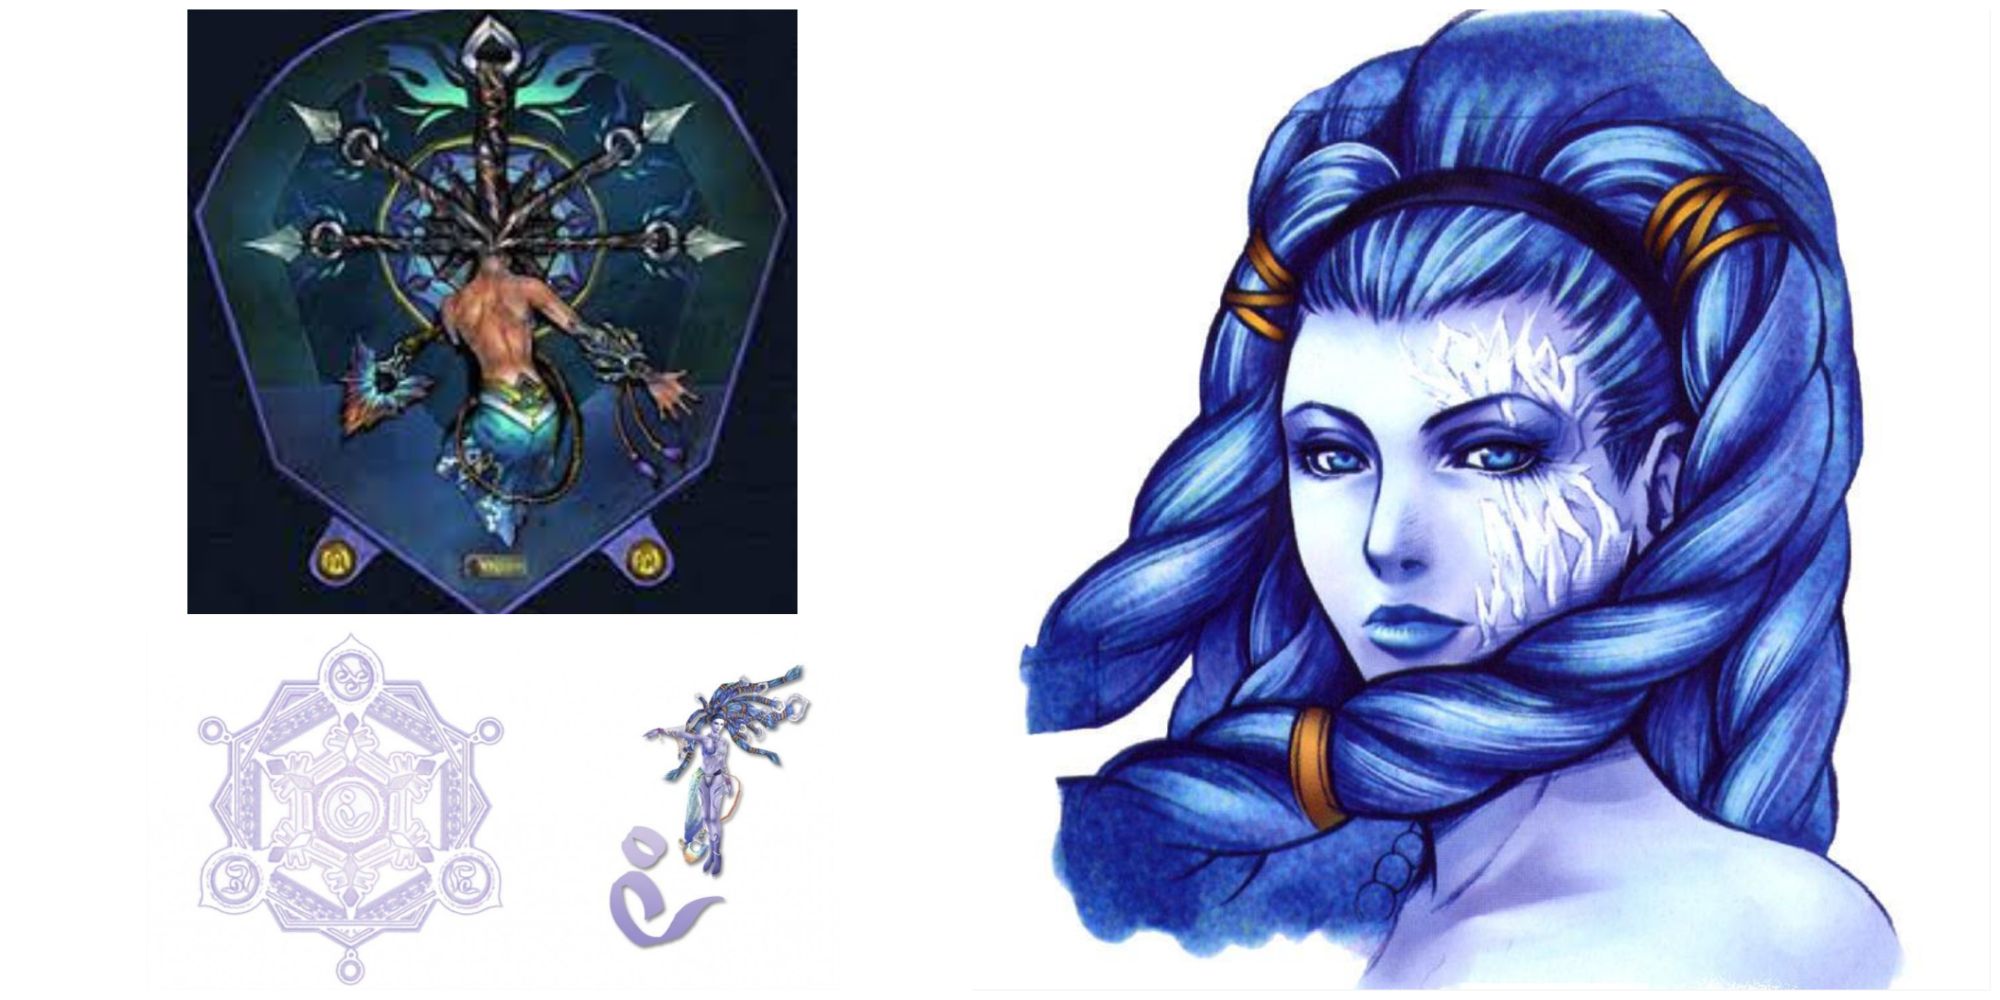 Final Fantasy X Shiva, with sprite, fayth statue, summoning glyph and symbol, and in-game model